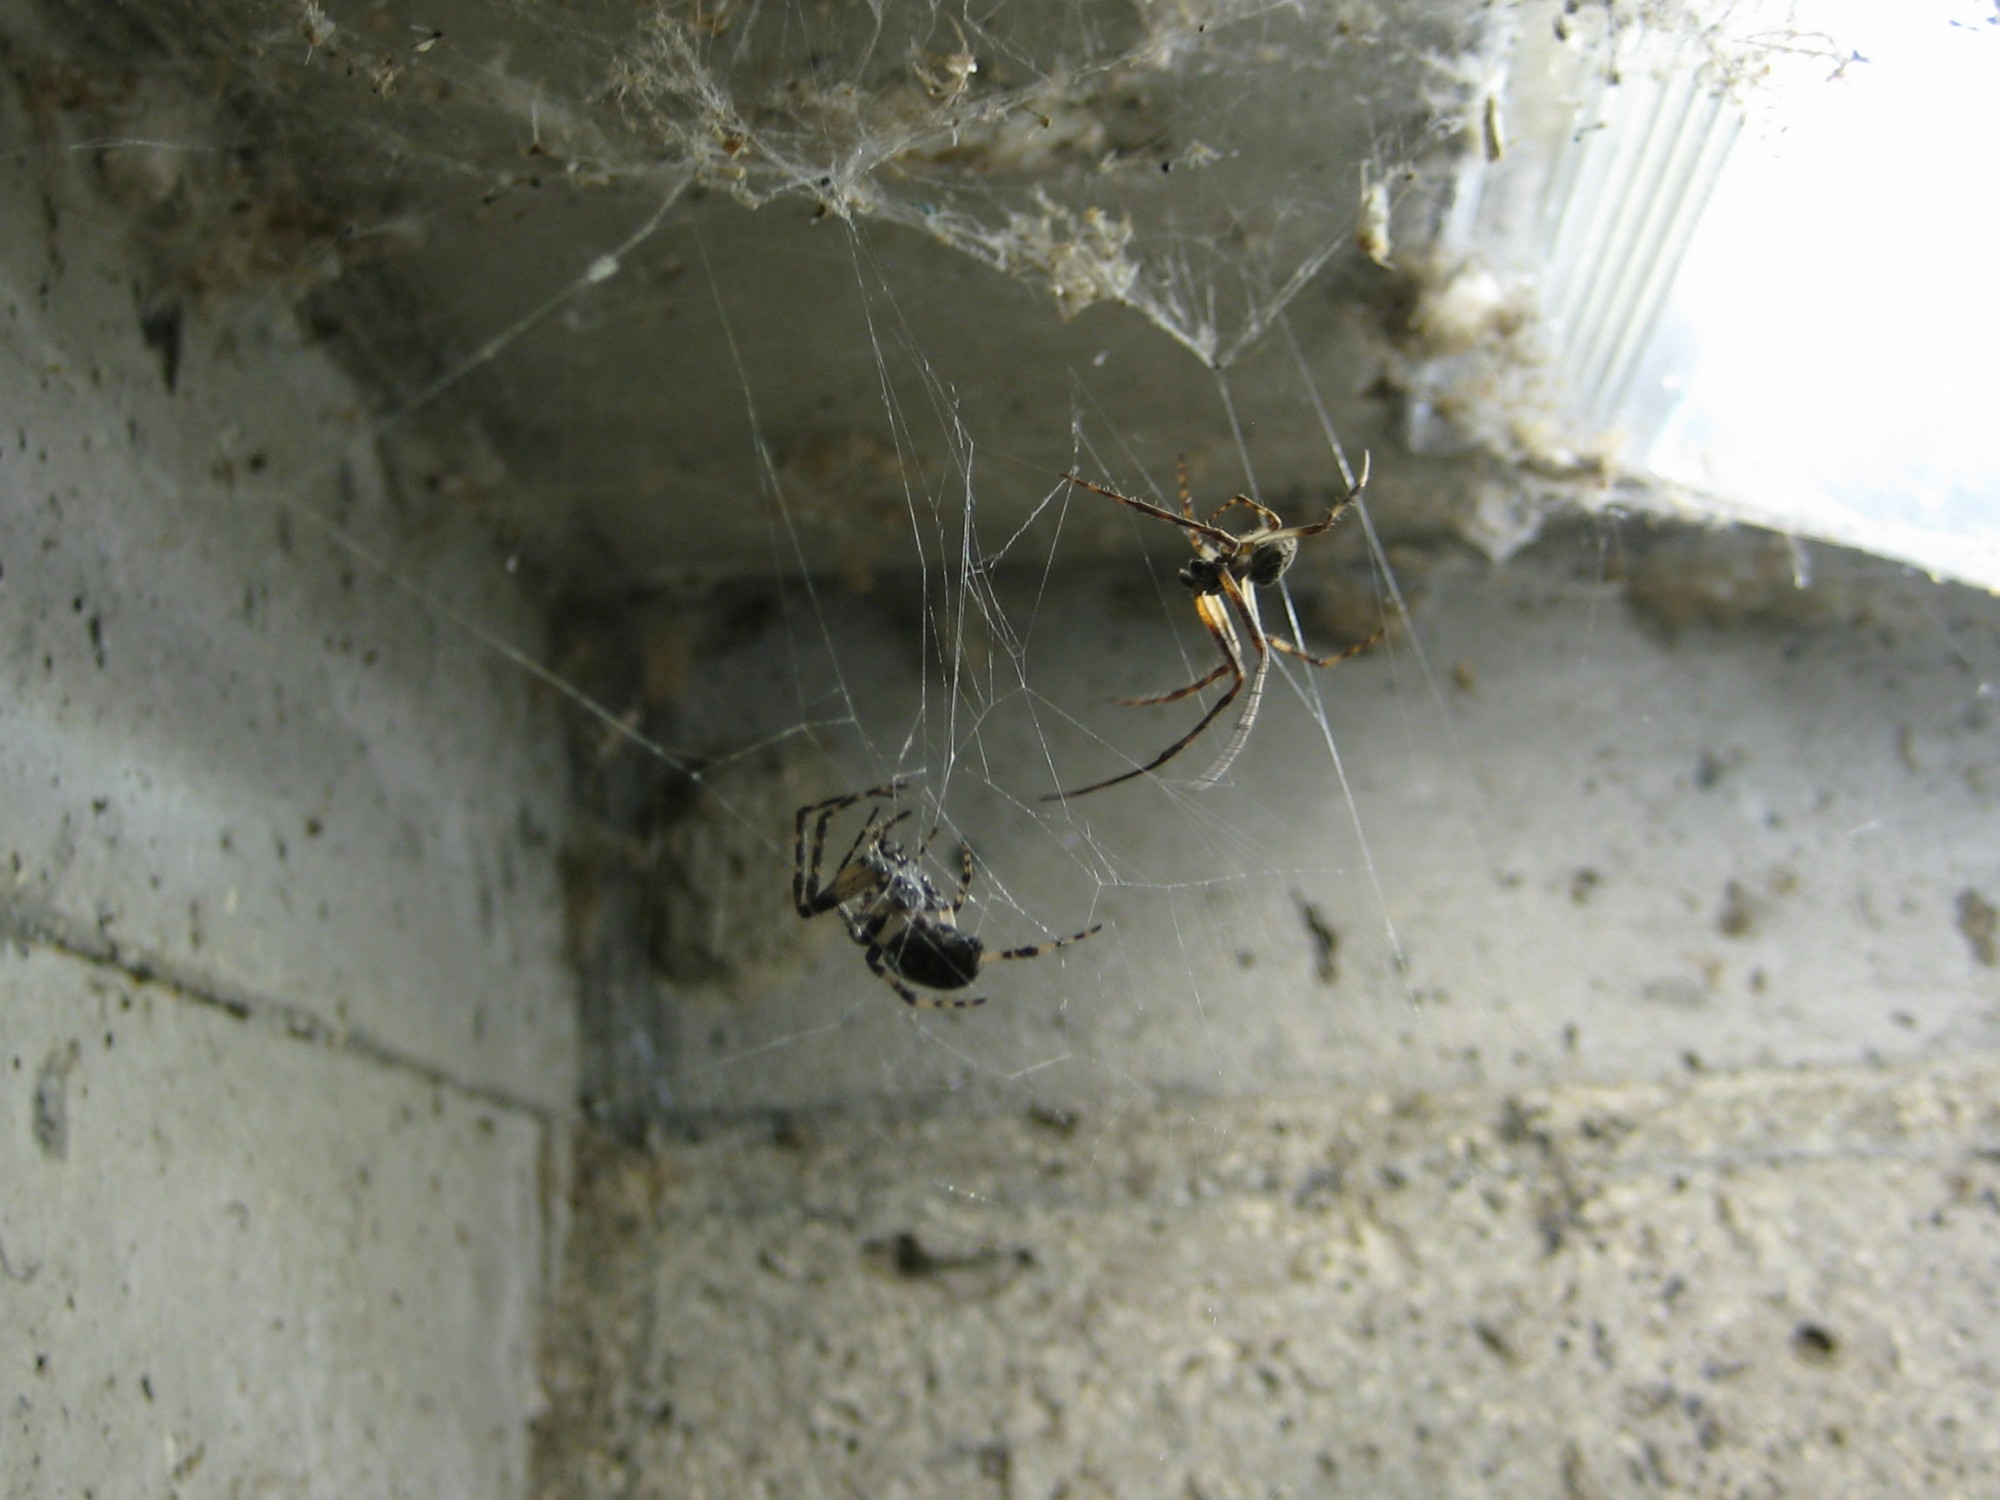 A male Larinioides approaches a female in her web, tapping and plucking the web to signal his approach.